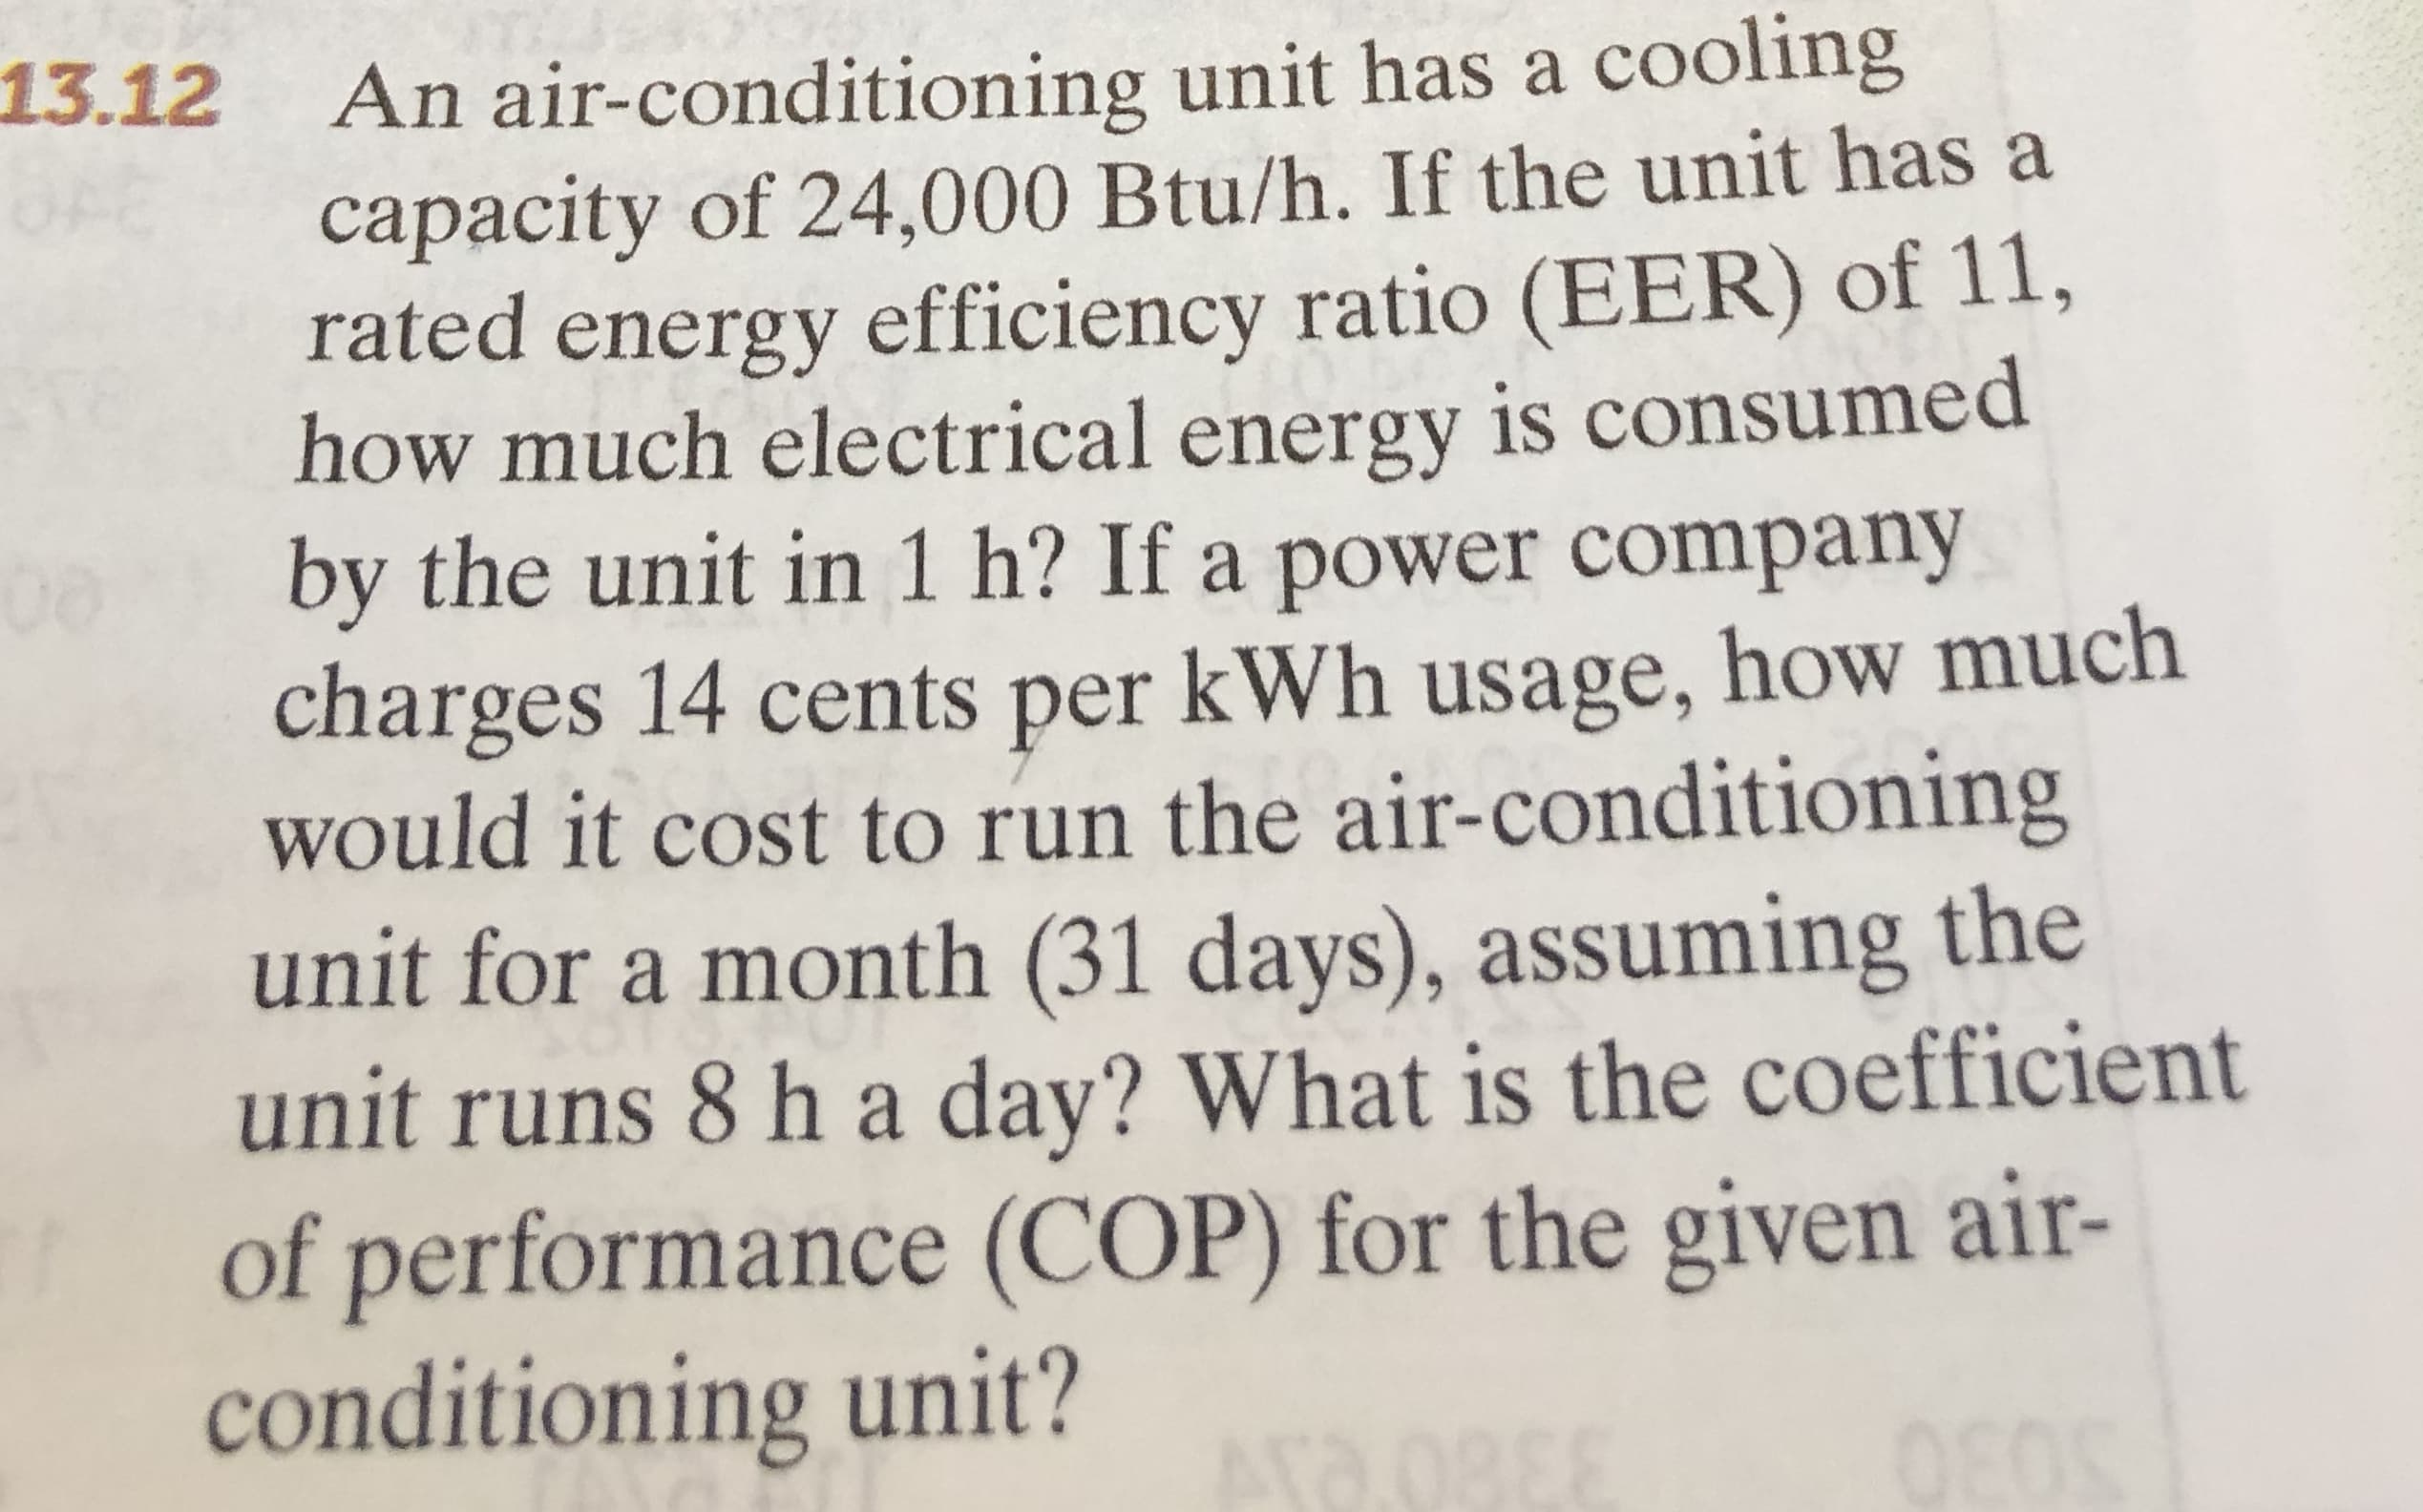 13.12 An air-conditioning unit has a cooling
capacity of 24,000 Btu/h. If the unit has a
rated energy efficiency ratio (EER) of 11,
how much electrical is consumed
energy
by the unit in 1 h? If a power company
charges 14 cents per kWh usage, how much
would it cost to run the air-conditioning
unit for a month (31 days), assuming the
unit runs 8 h a day? What is the coefficient
of performance (COP) for the given air-
conditioning unit?
Ara.08
0888
